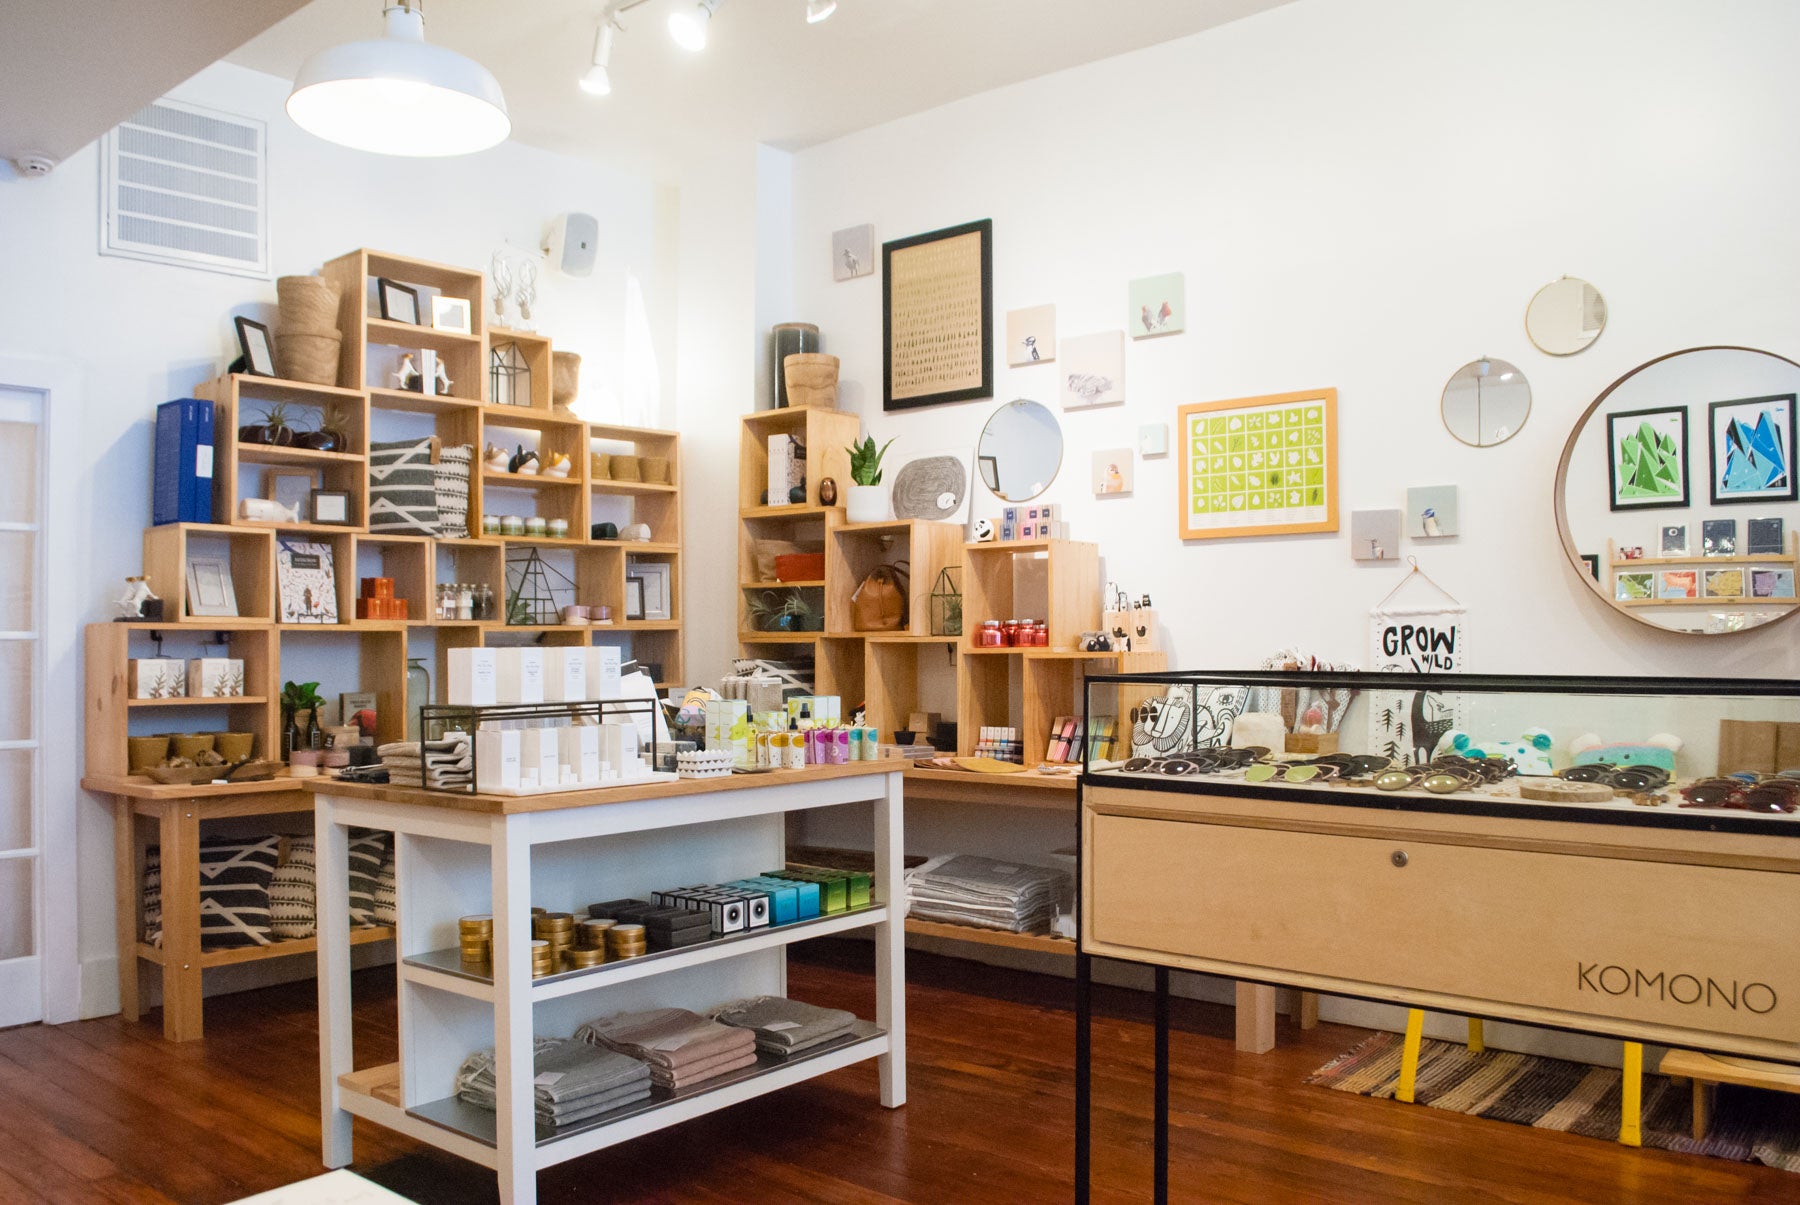 Personal accessories, home goods, and plant-based apothecary selects gather towards the back of the shop